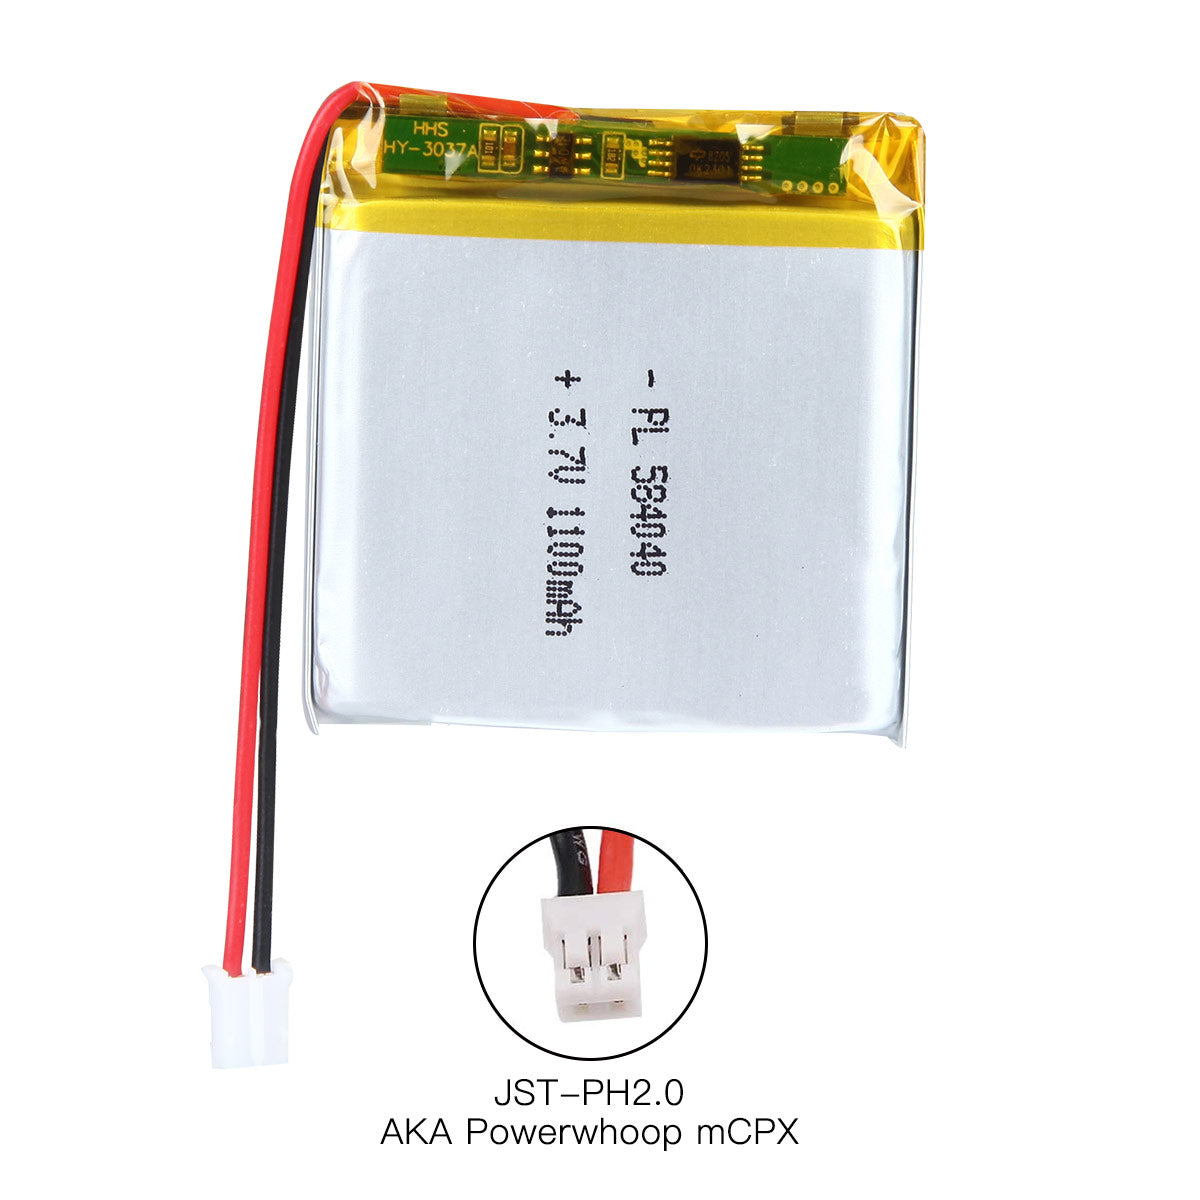 YDL 3.7V 1100mAh 584040 Rechargeable Lithium Polymer Battery Length 42mm